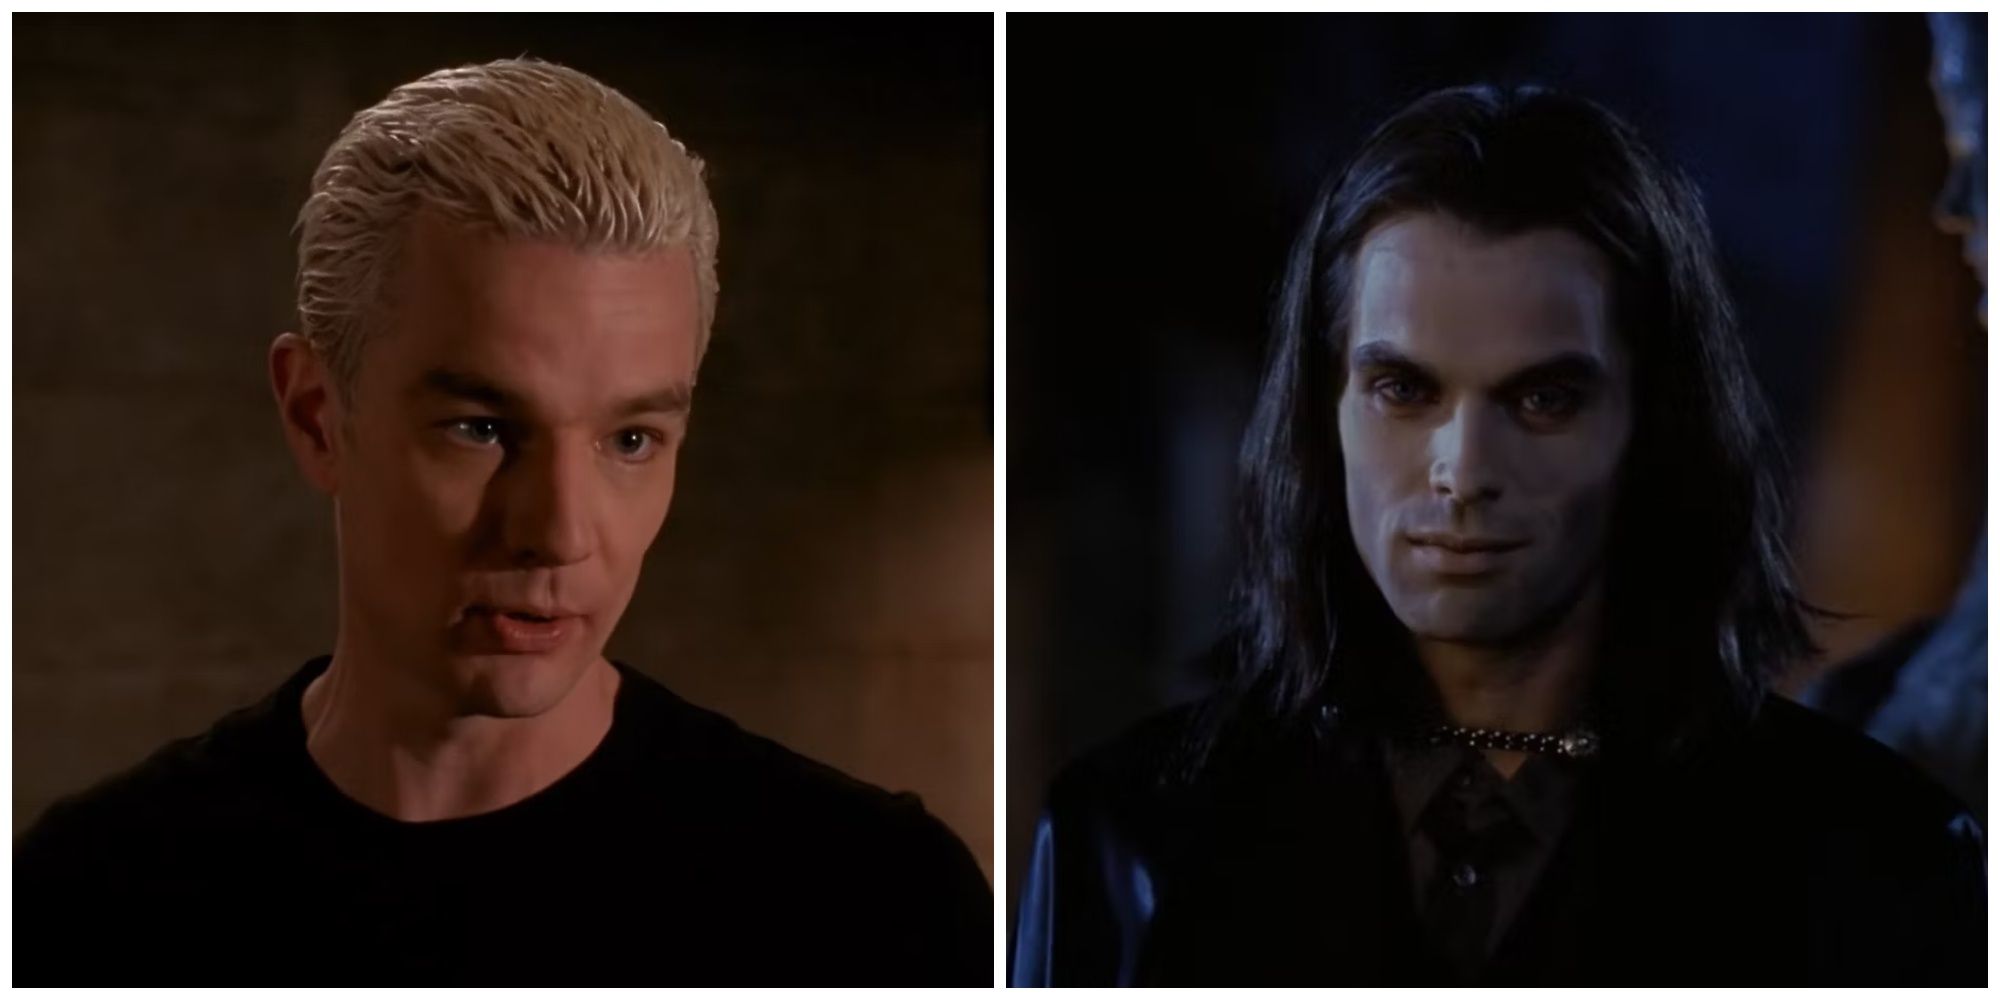 Spike and Dracula in Buffy the Vampire Slayer